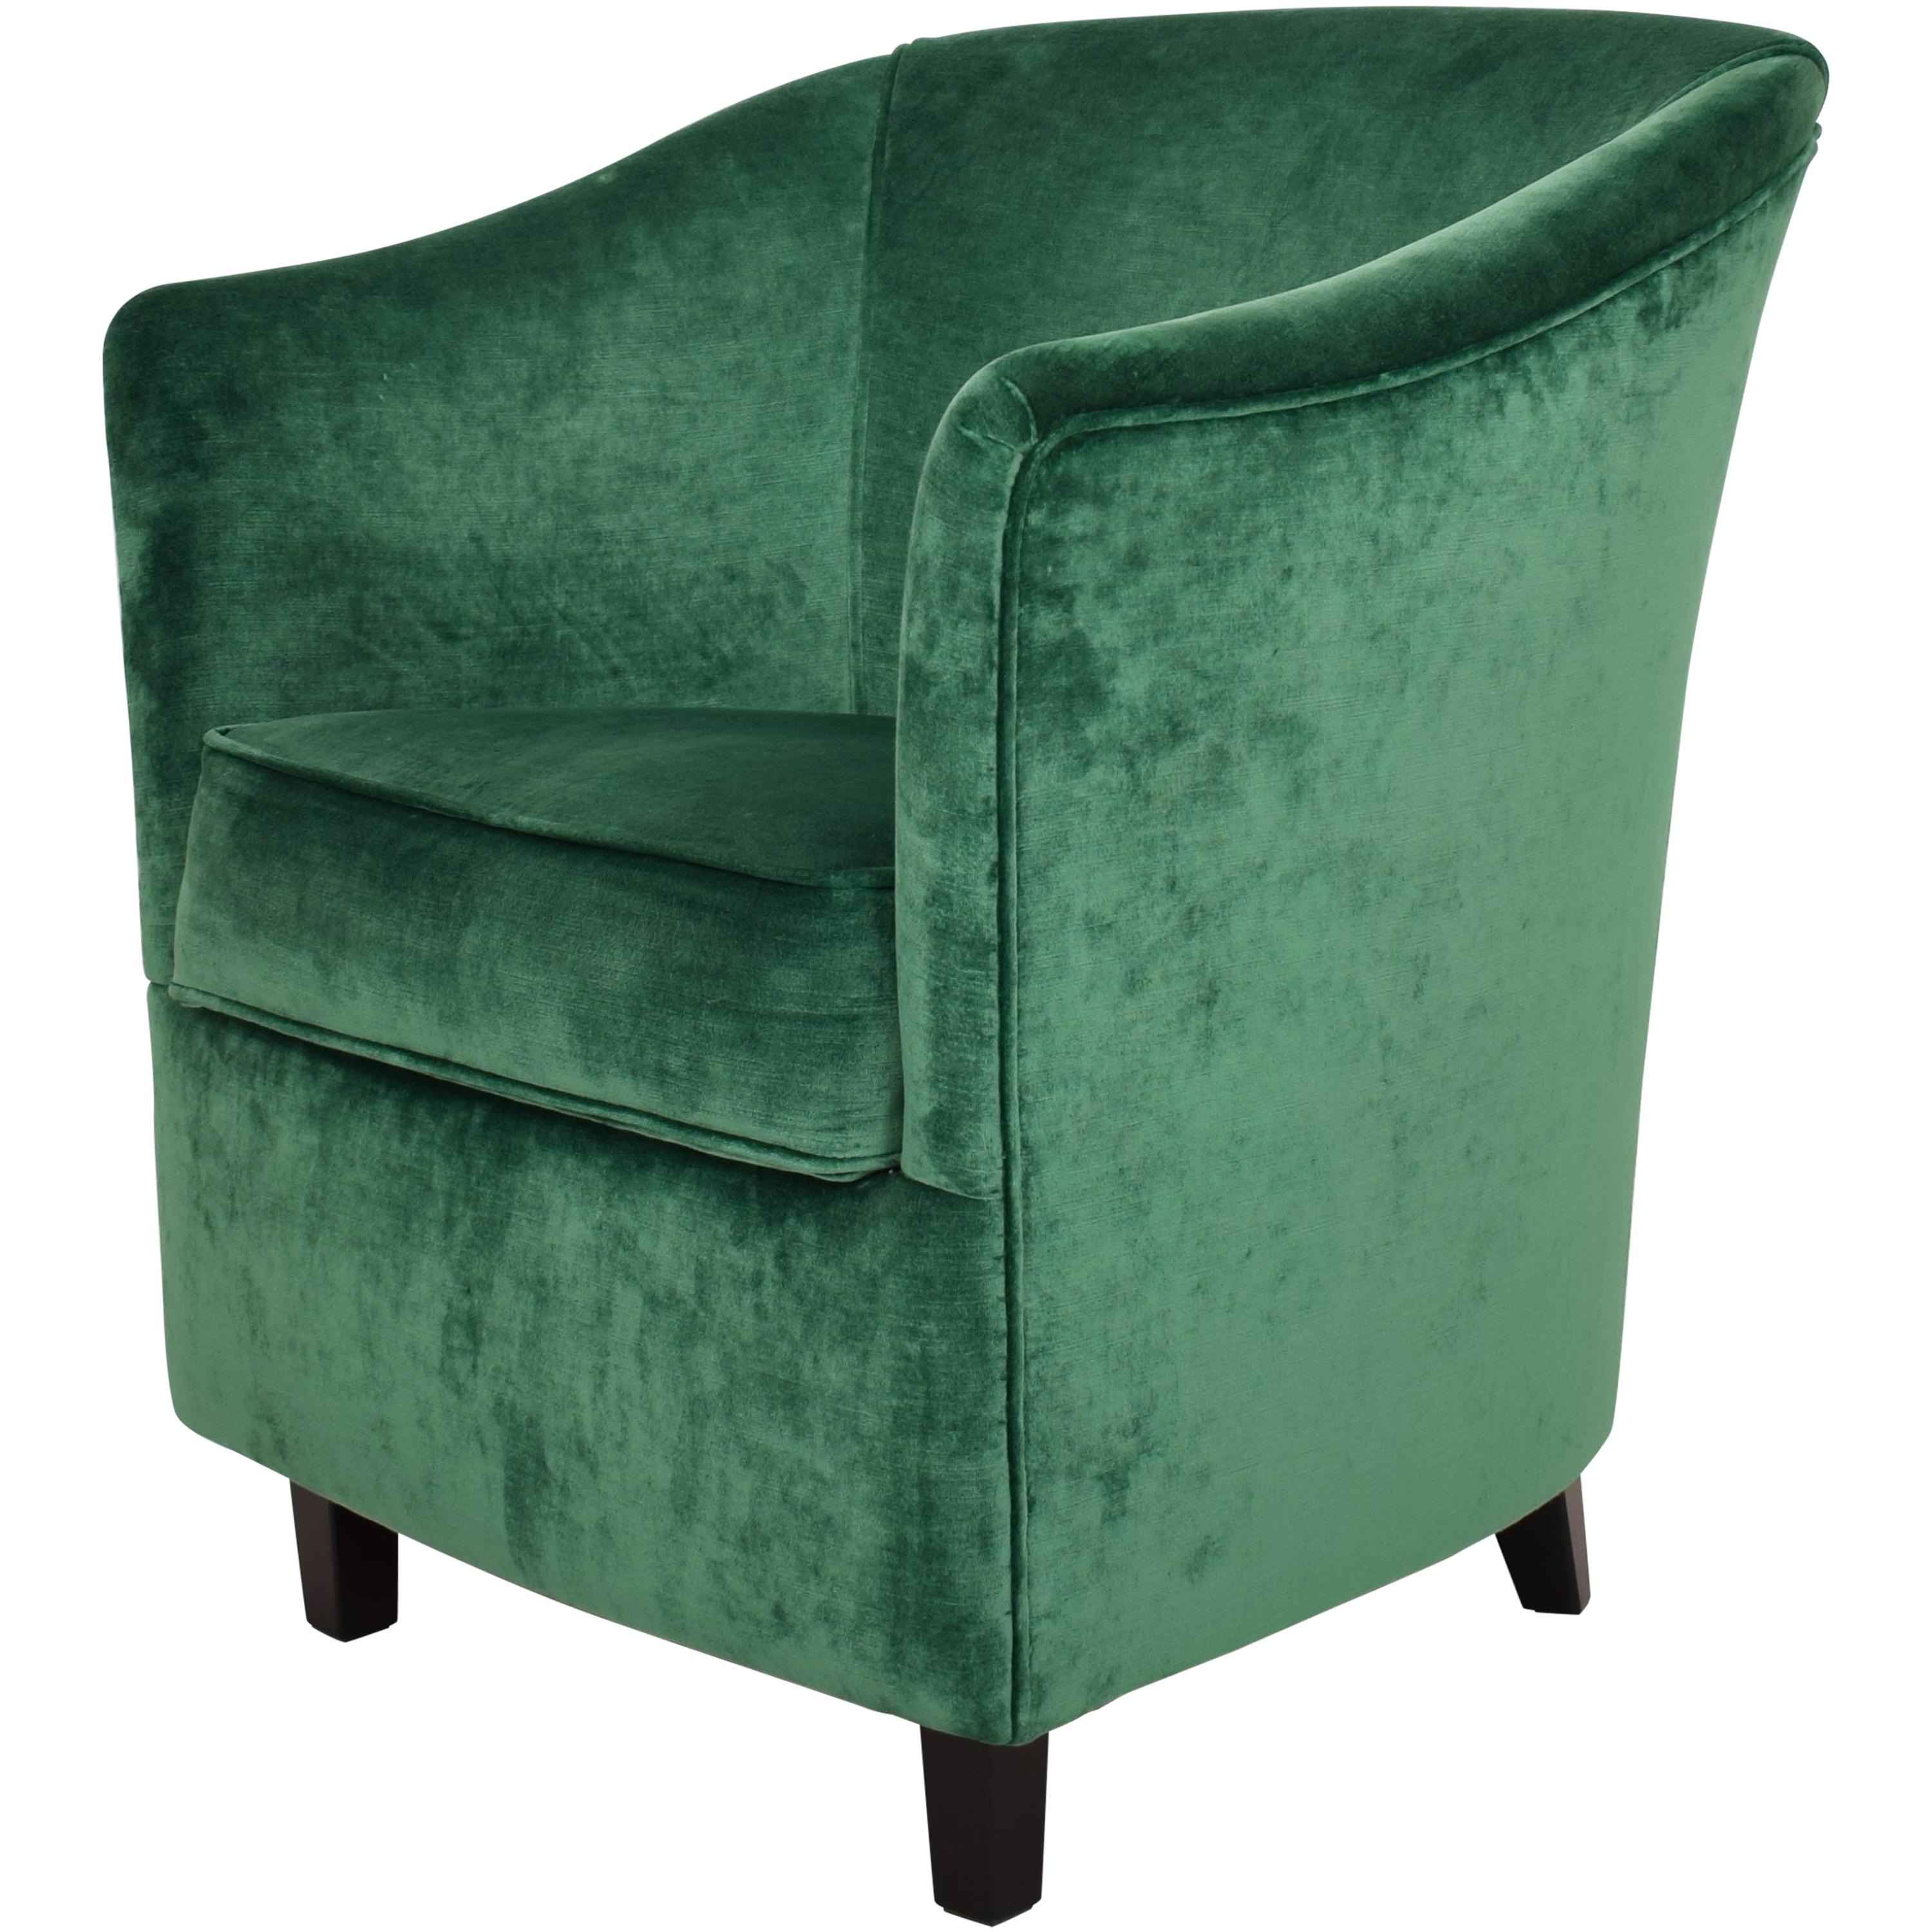 Midcentury French Small Club Chair / Armchair in Green Velvet, circa 1980